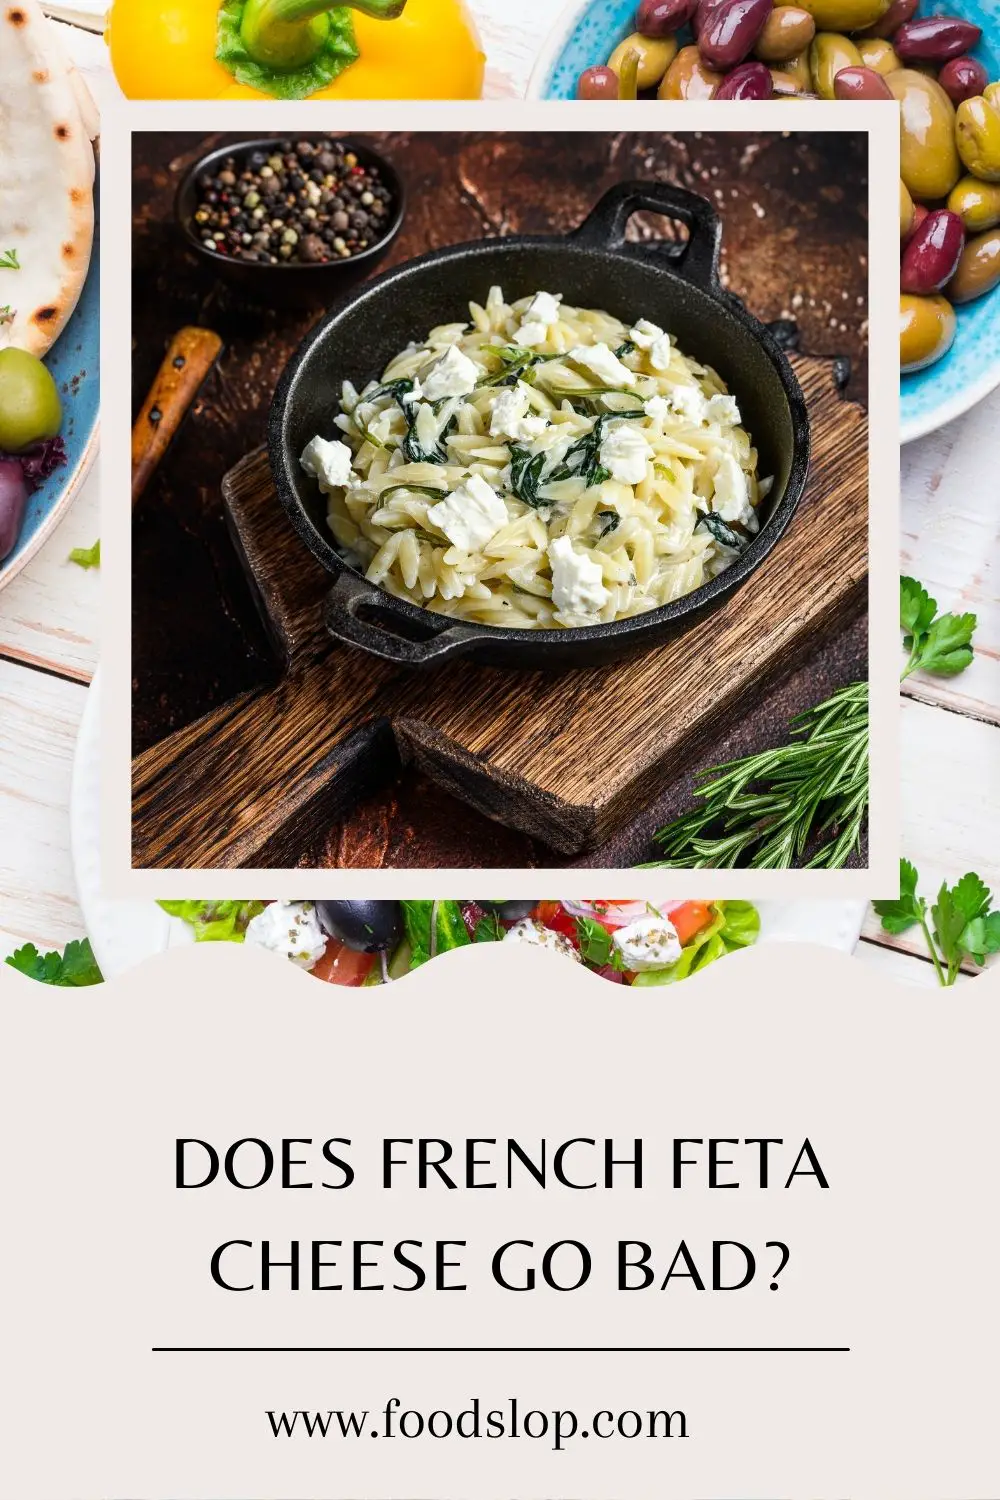 Does French Feta Cheese Go Bad?